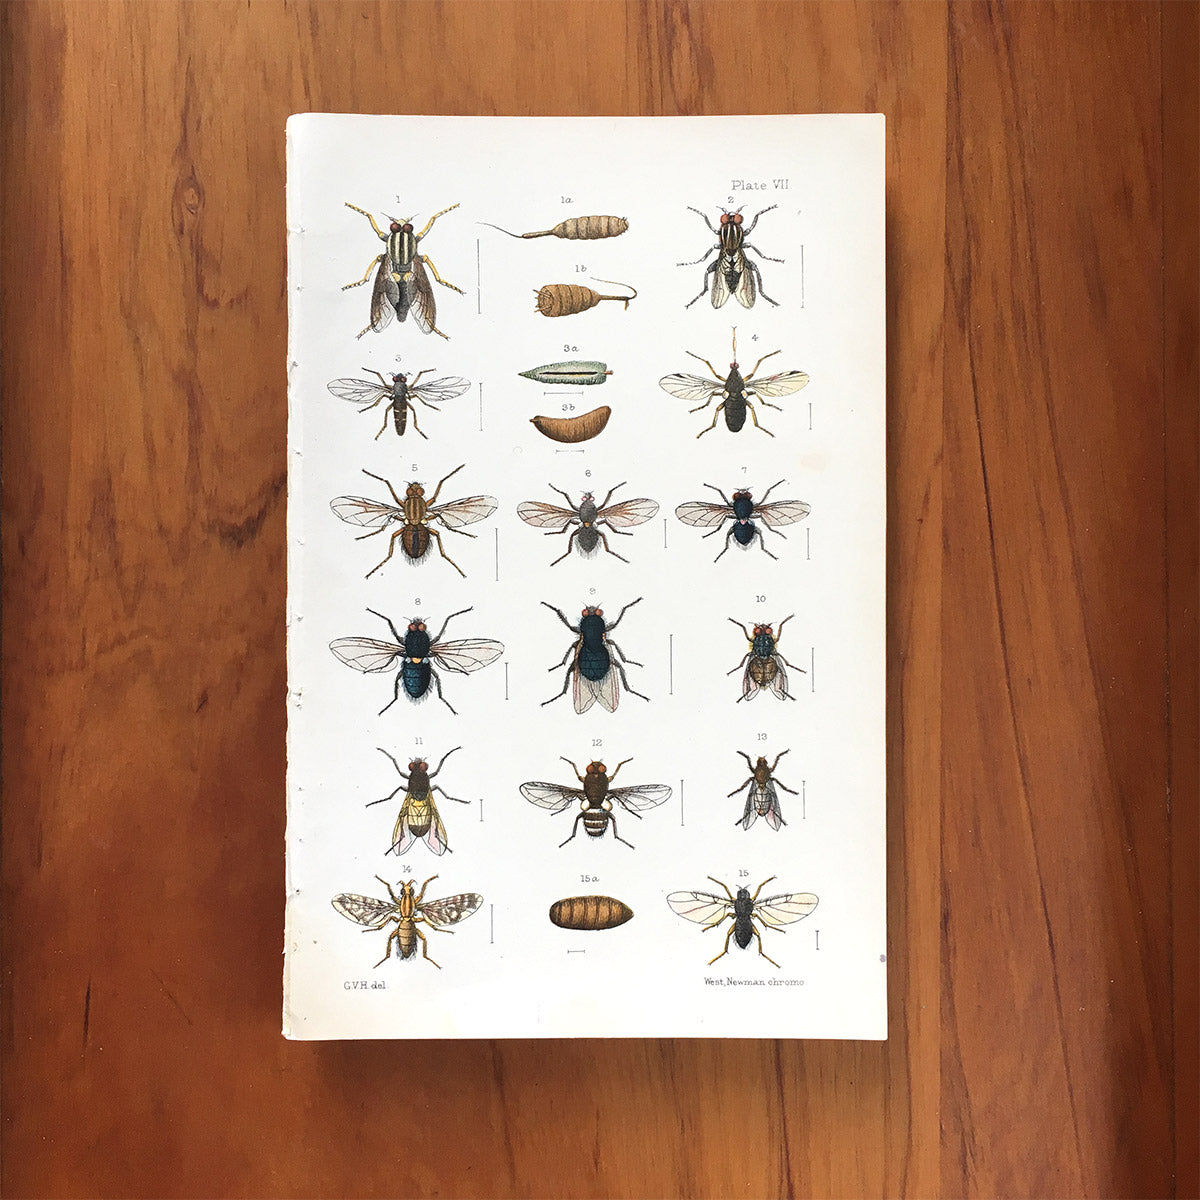 New Zealand insects. Plate VII. Diptera